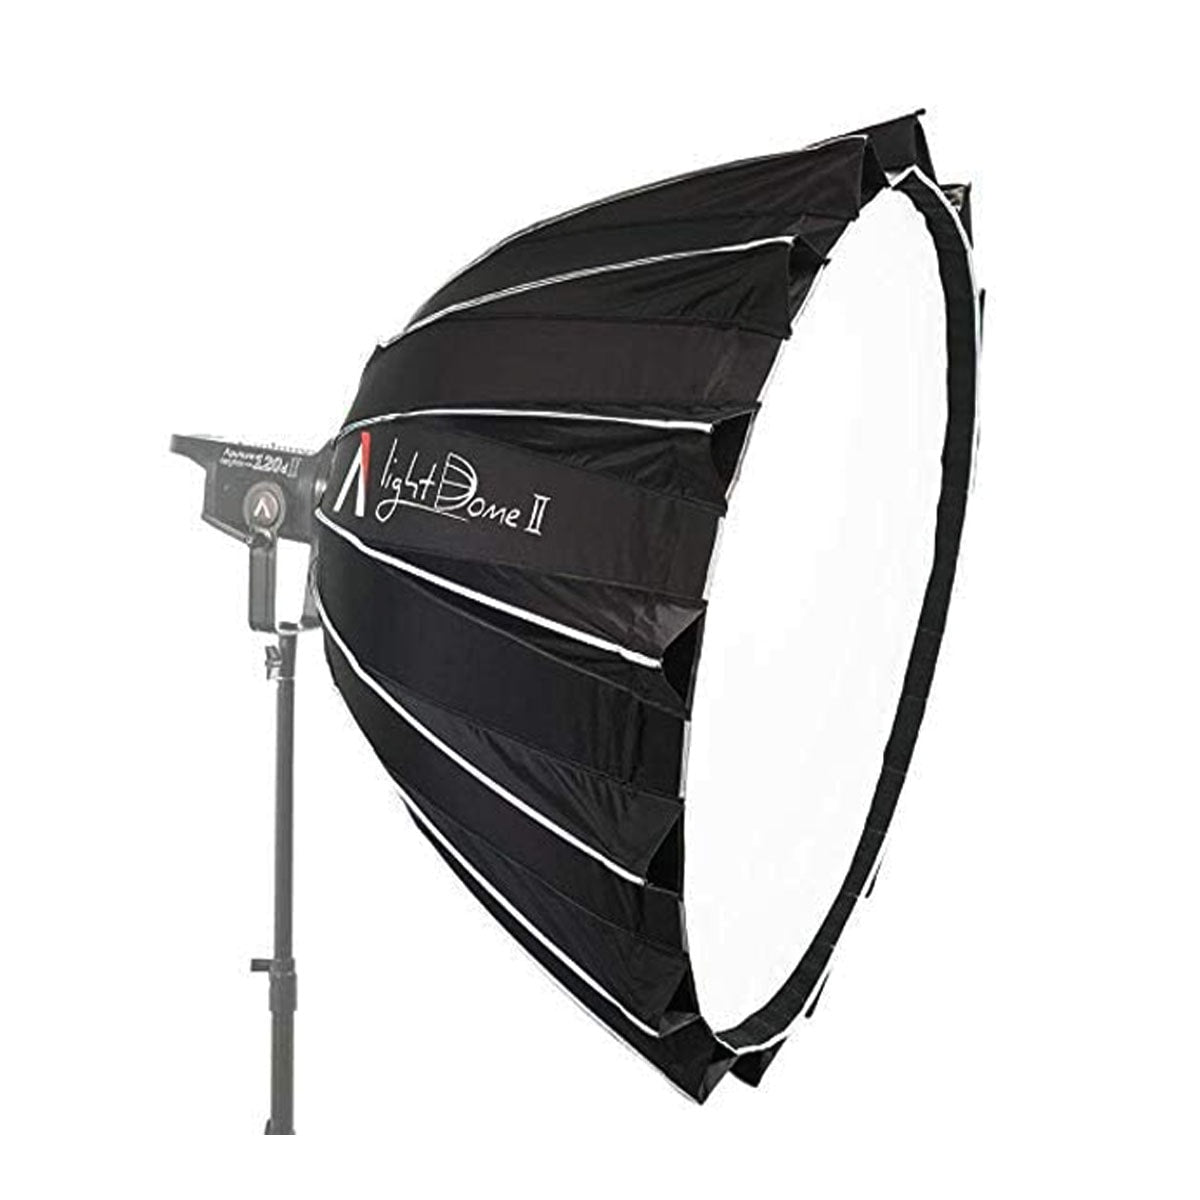 Aputure Octa Light Dome II, 90 cm / 3'  for LS 300 up to LS 1200